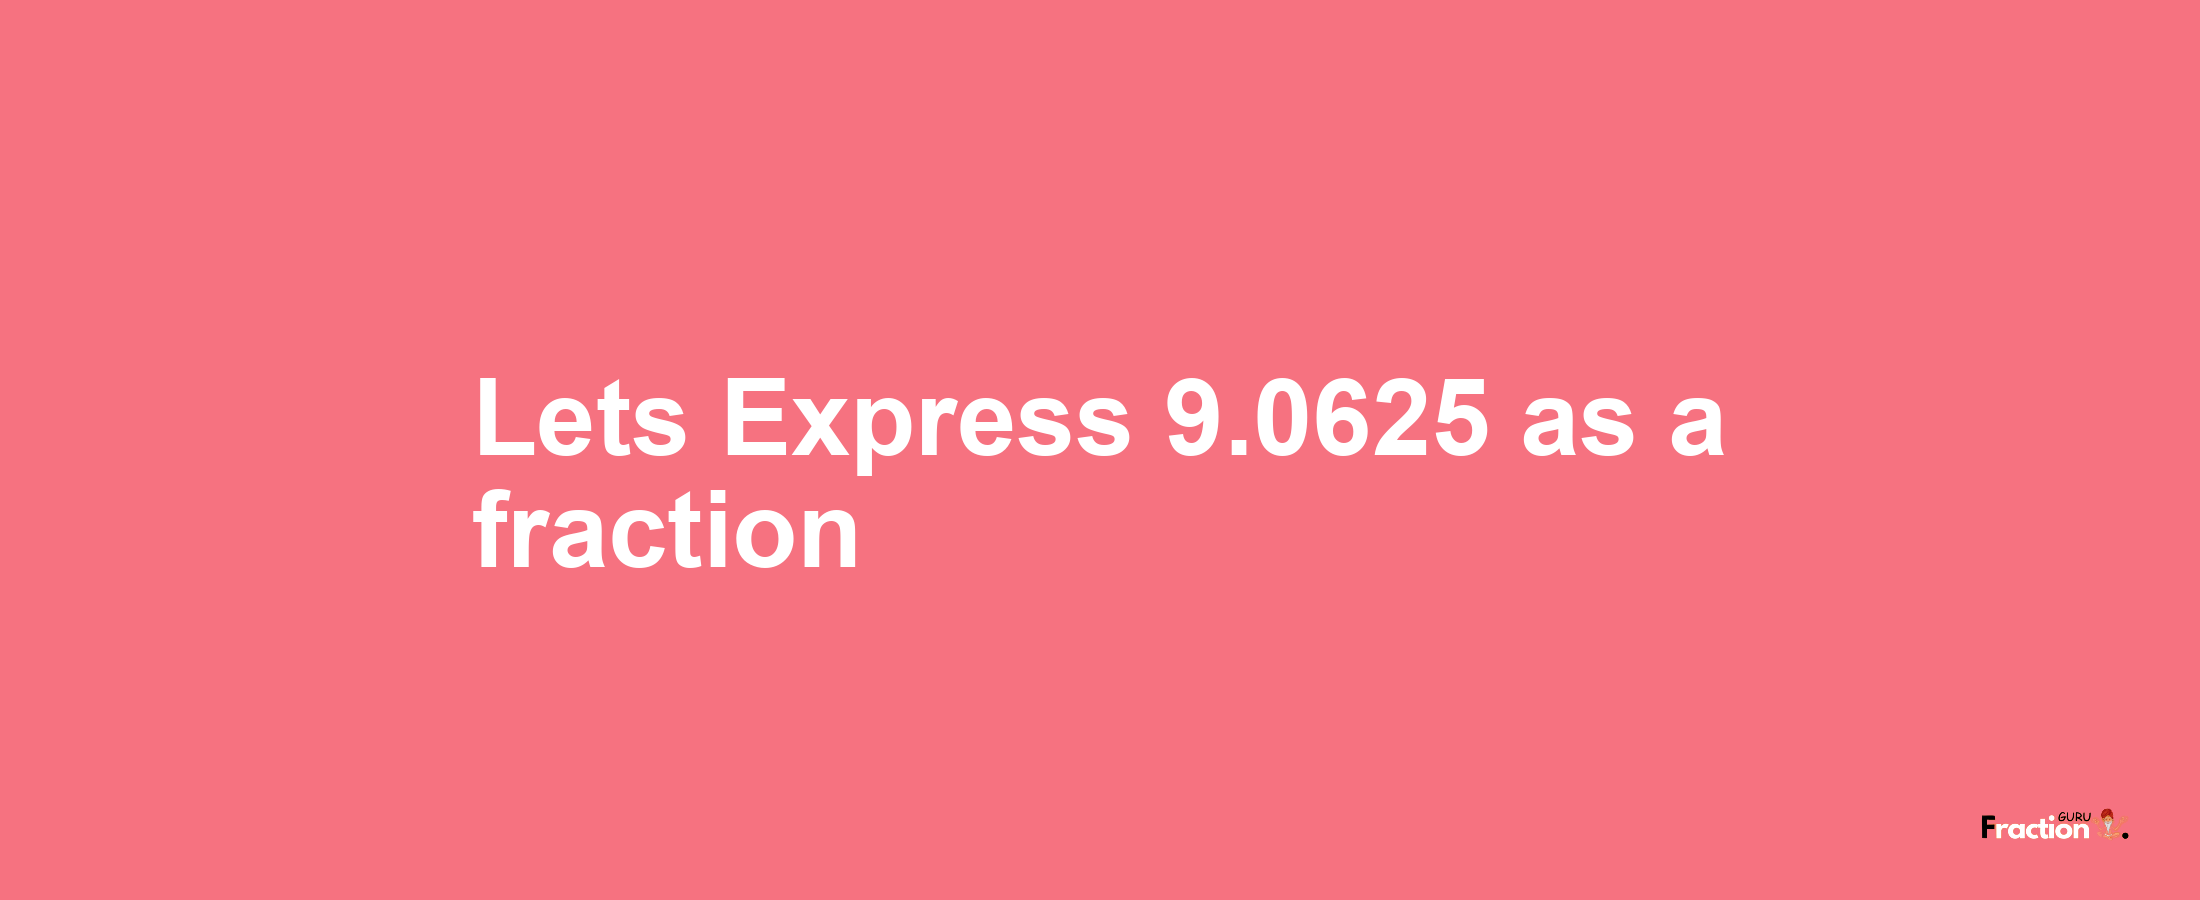 Lets Express 9.0625 as afraction